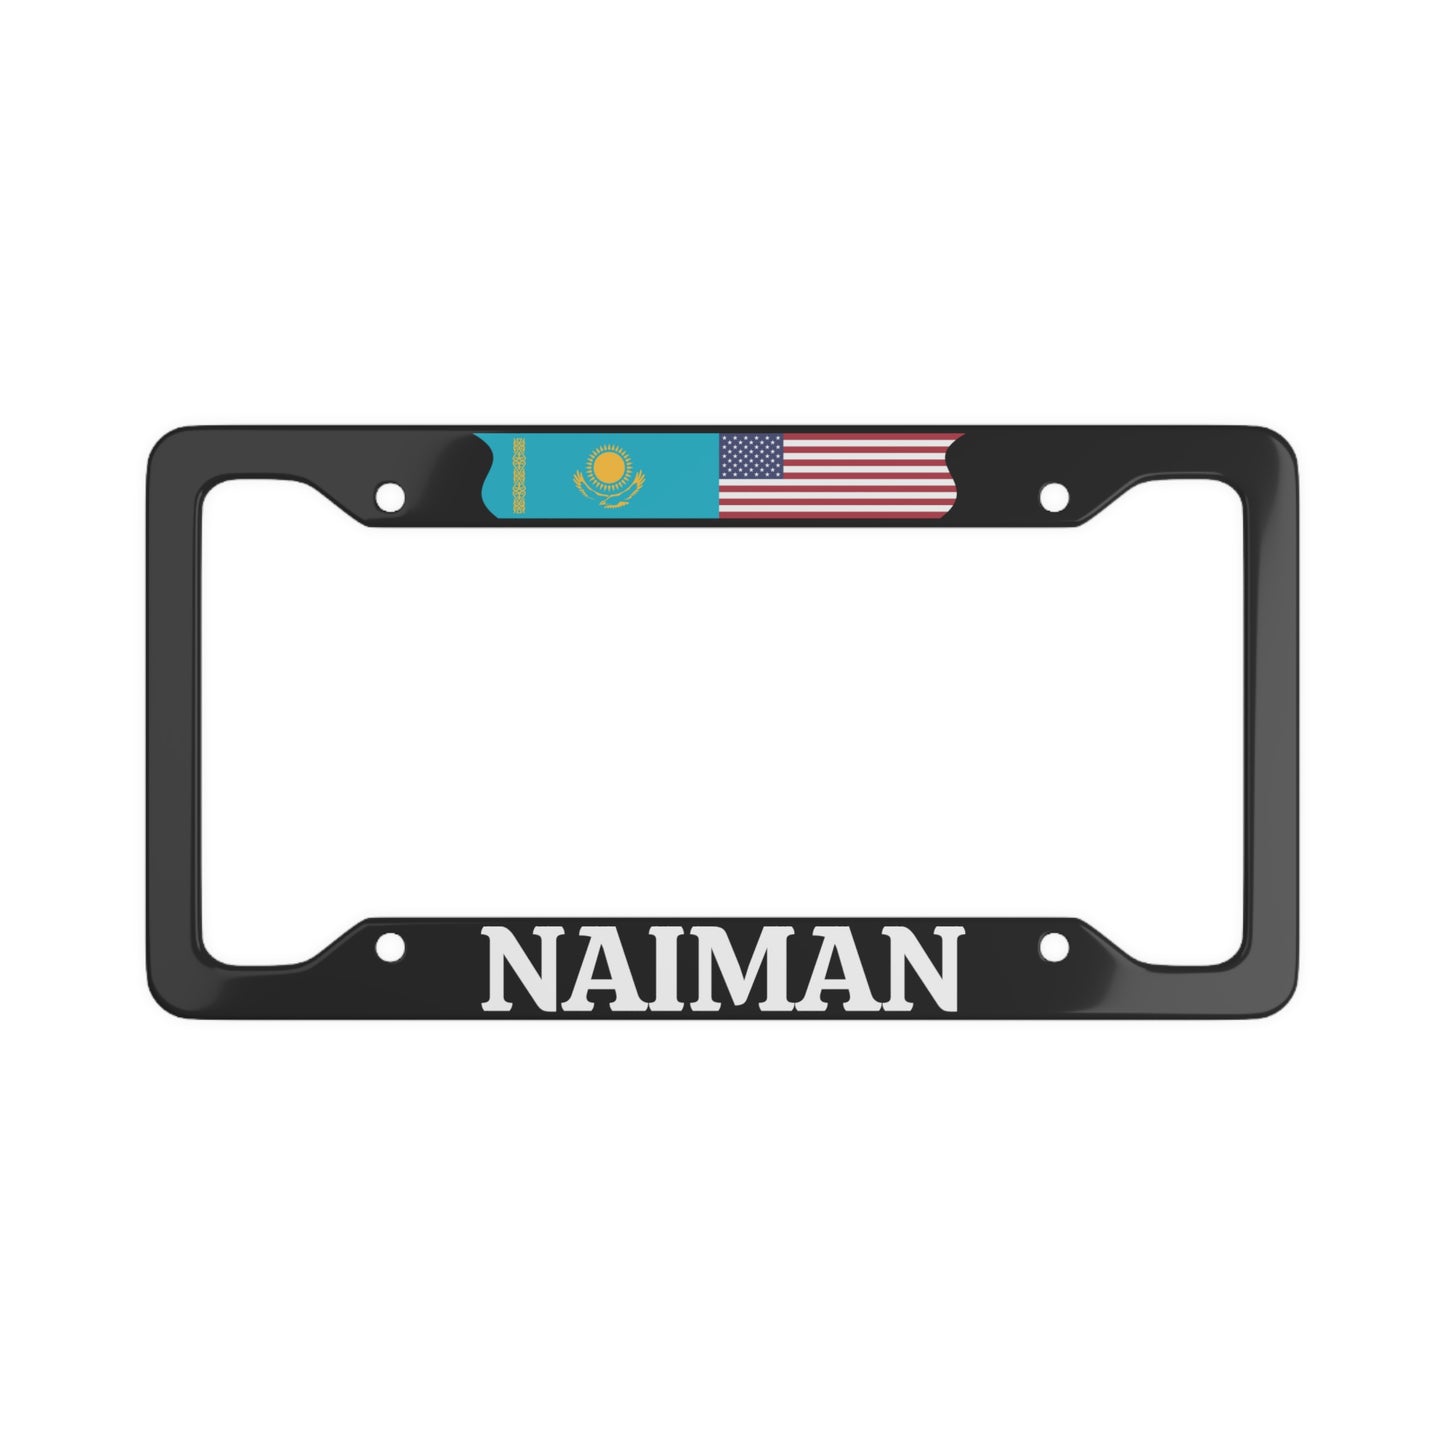 NAIMAN with flag License Plate Frame